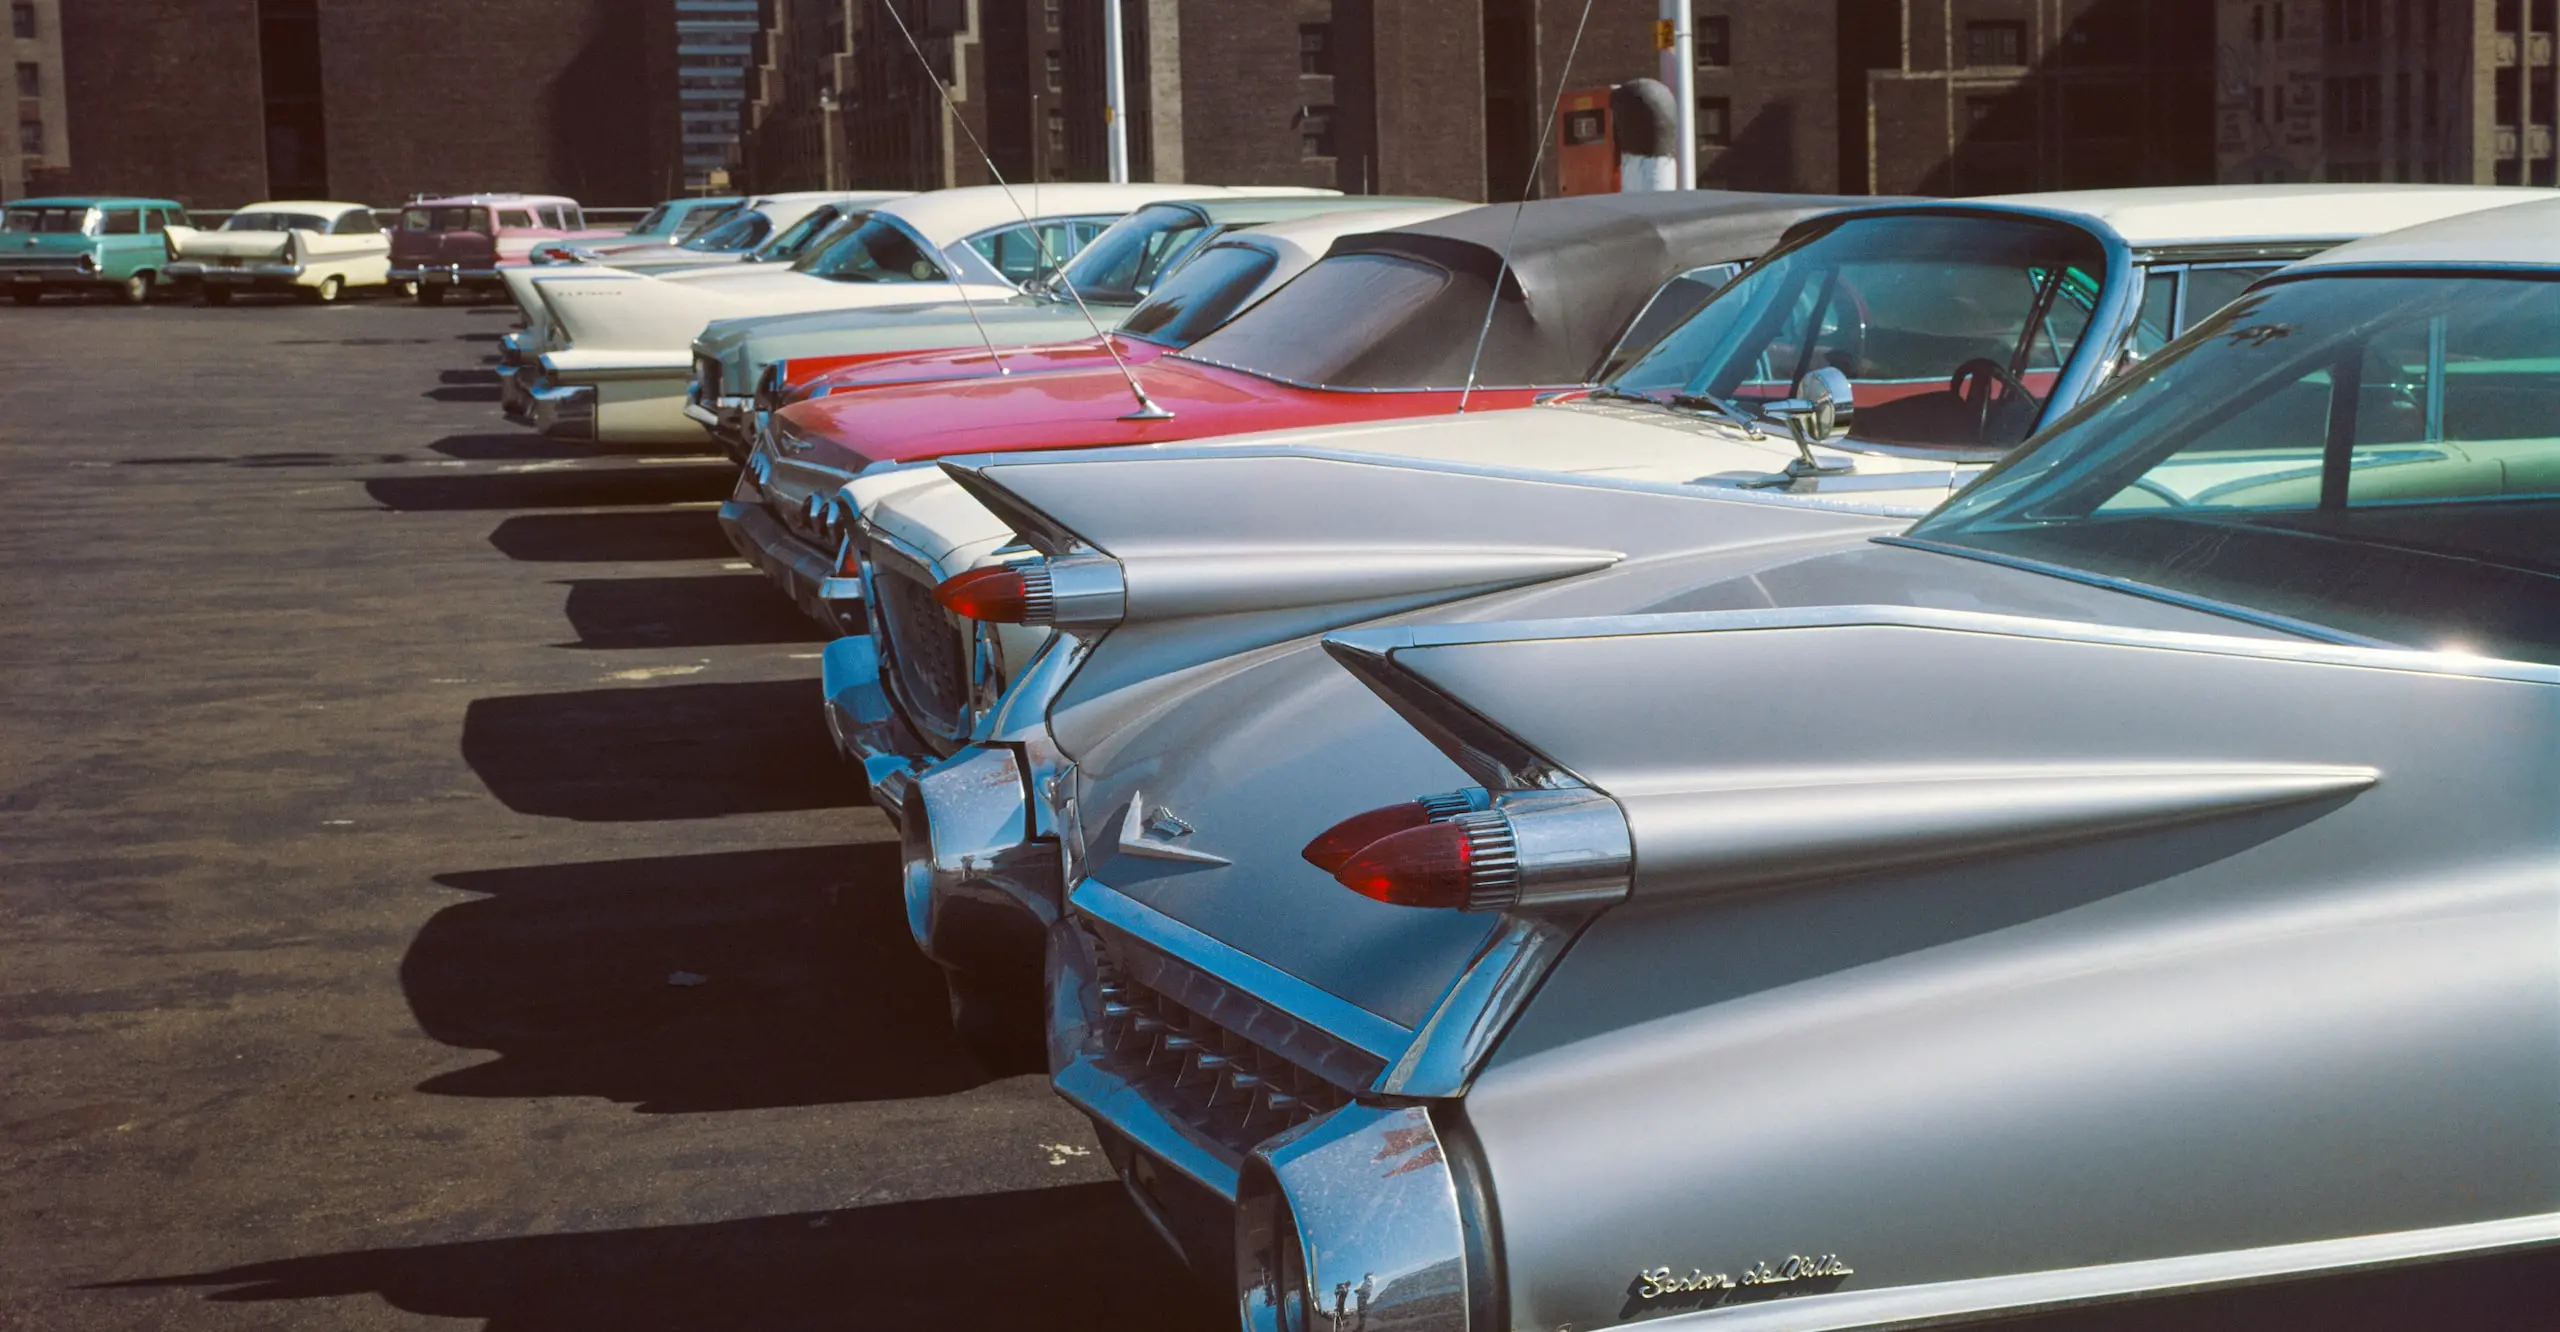 Colour photograph of a row of 1960s cars in a parking lot.